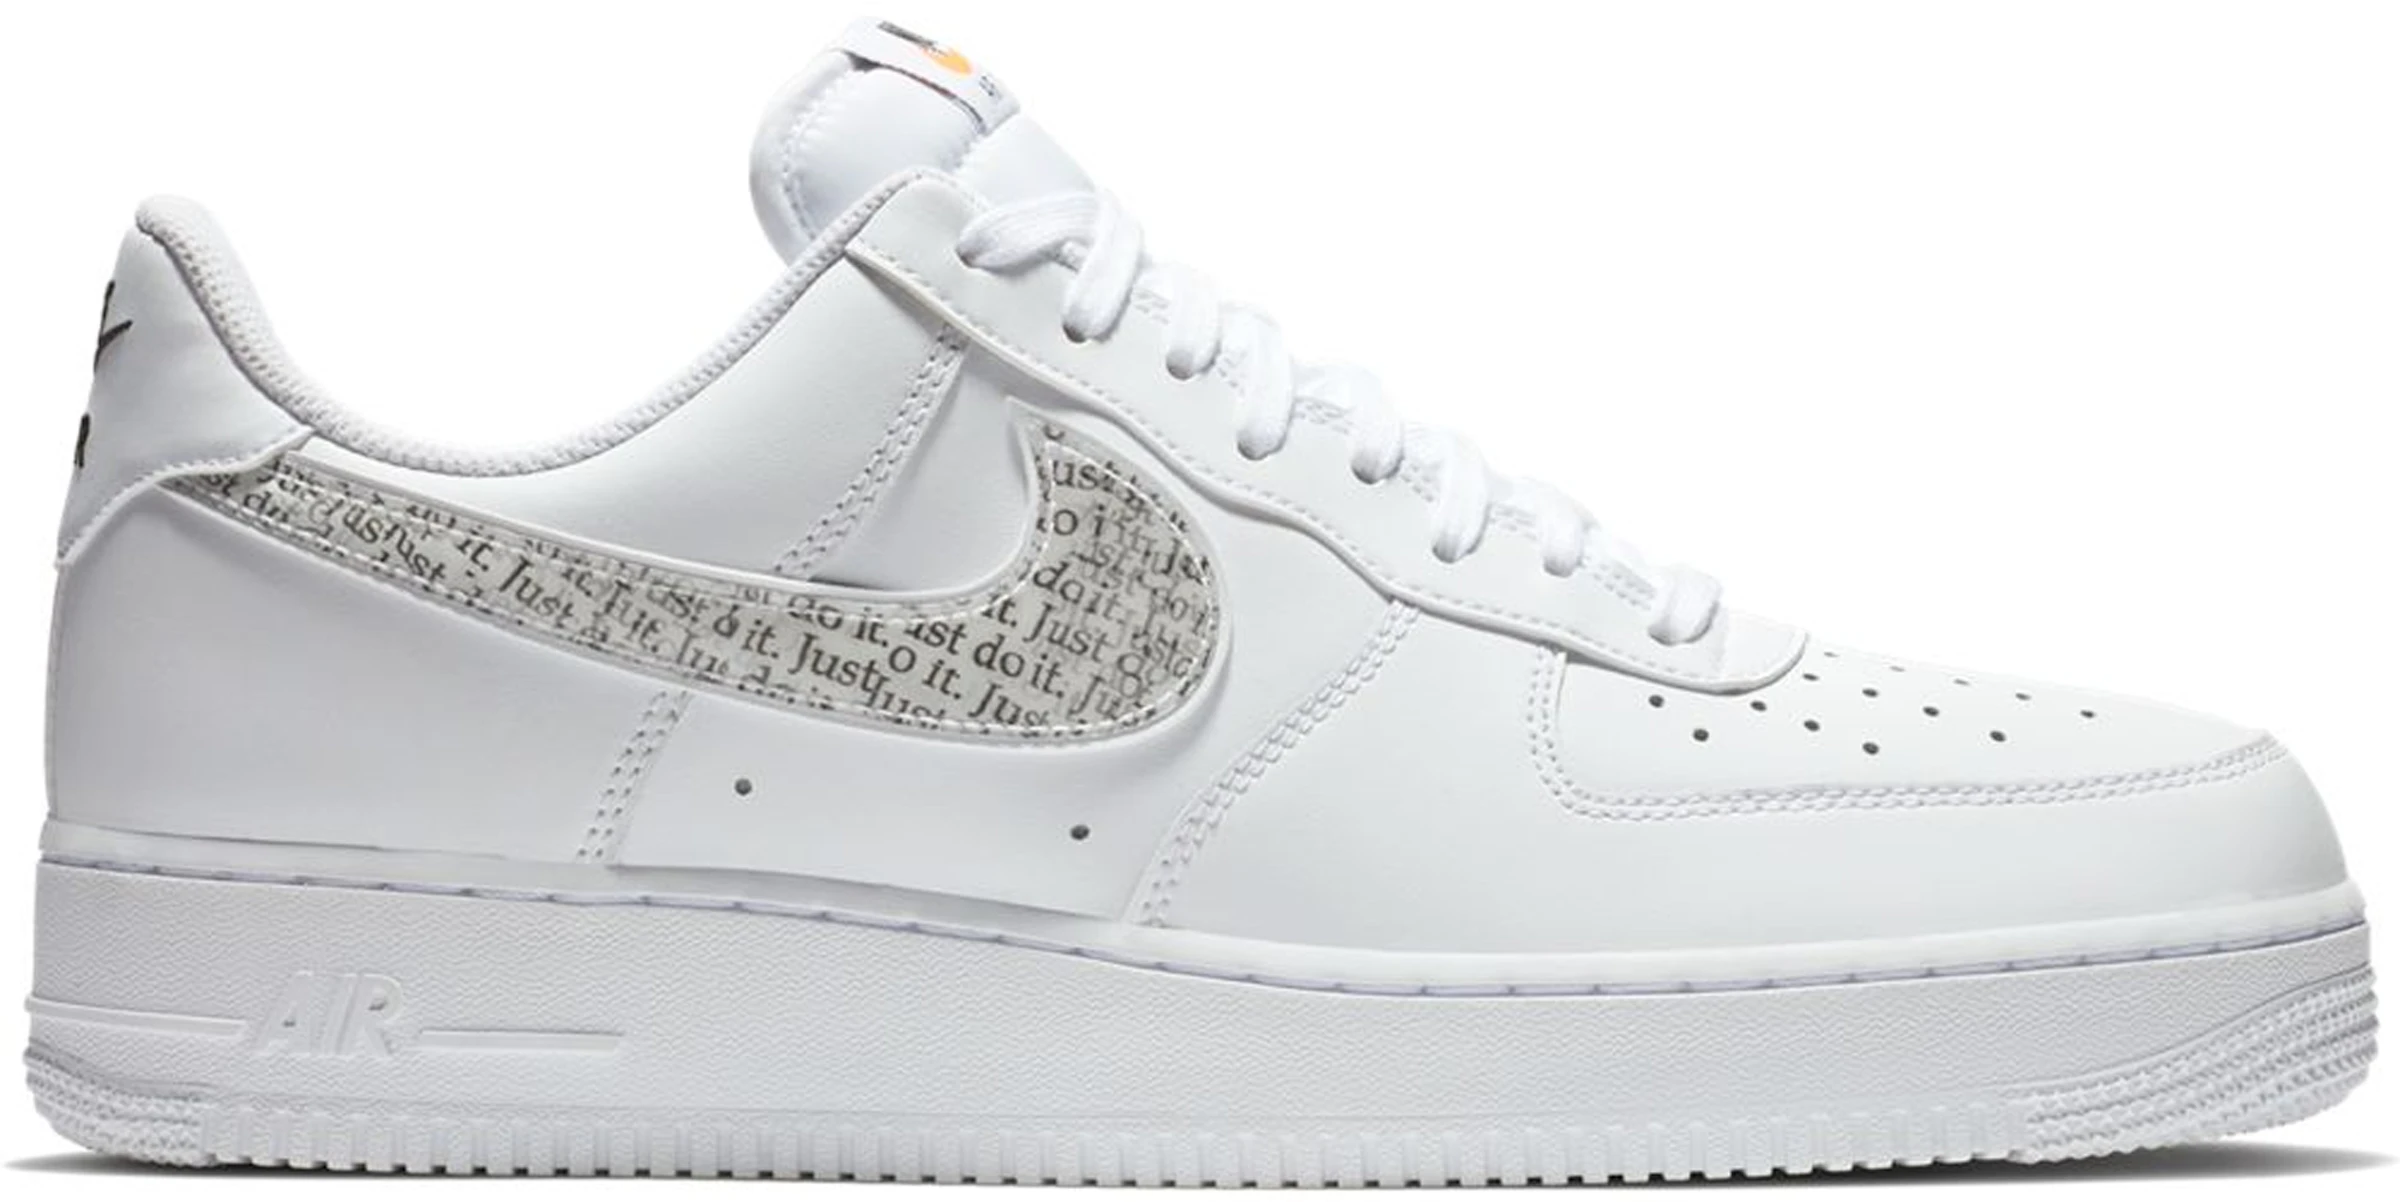 Reiben Jede Woche lila nike air force 1 low just do it pack white ...